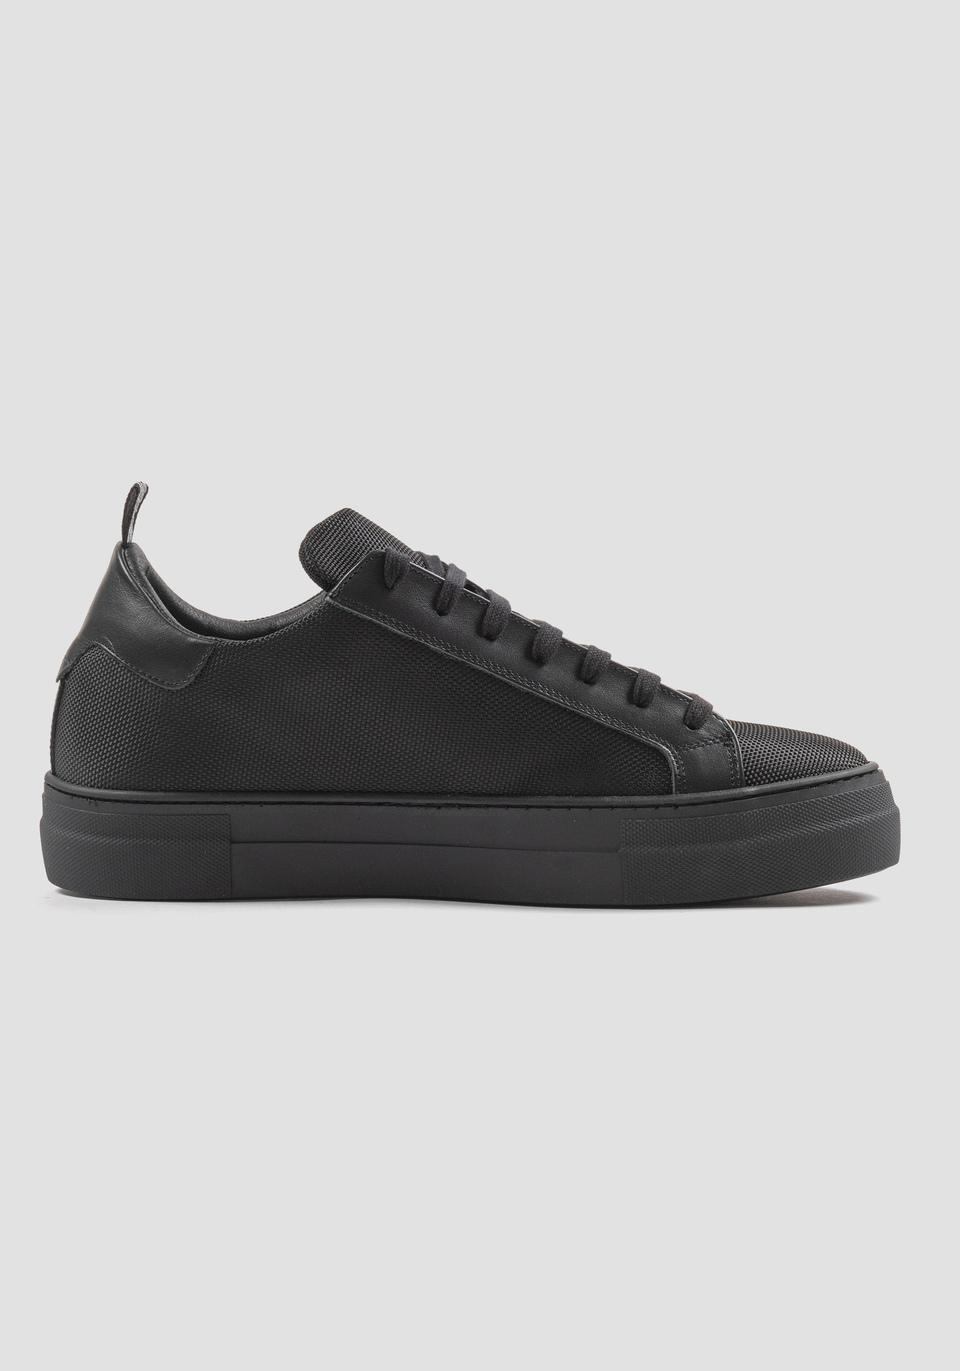 “LOW BOLD METAL” SNEAKER IN NYLON WITH LEATHER DETAILING AND A CHUNKY SOLE - Antony Morato Online Shop